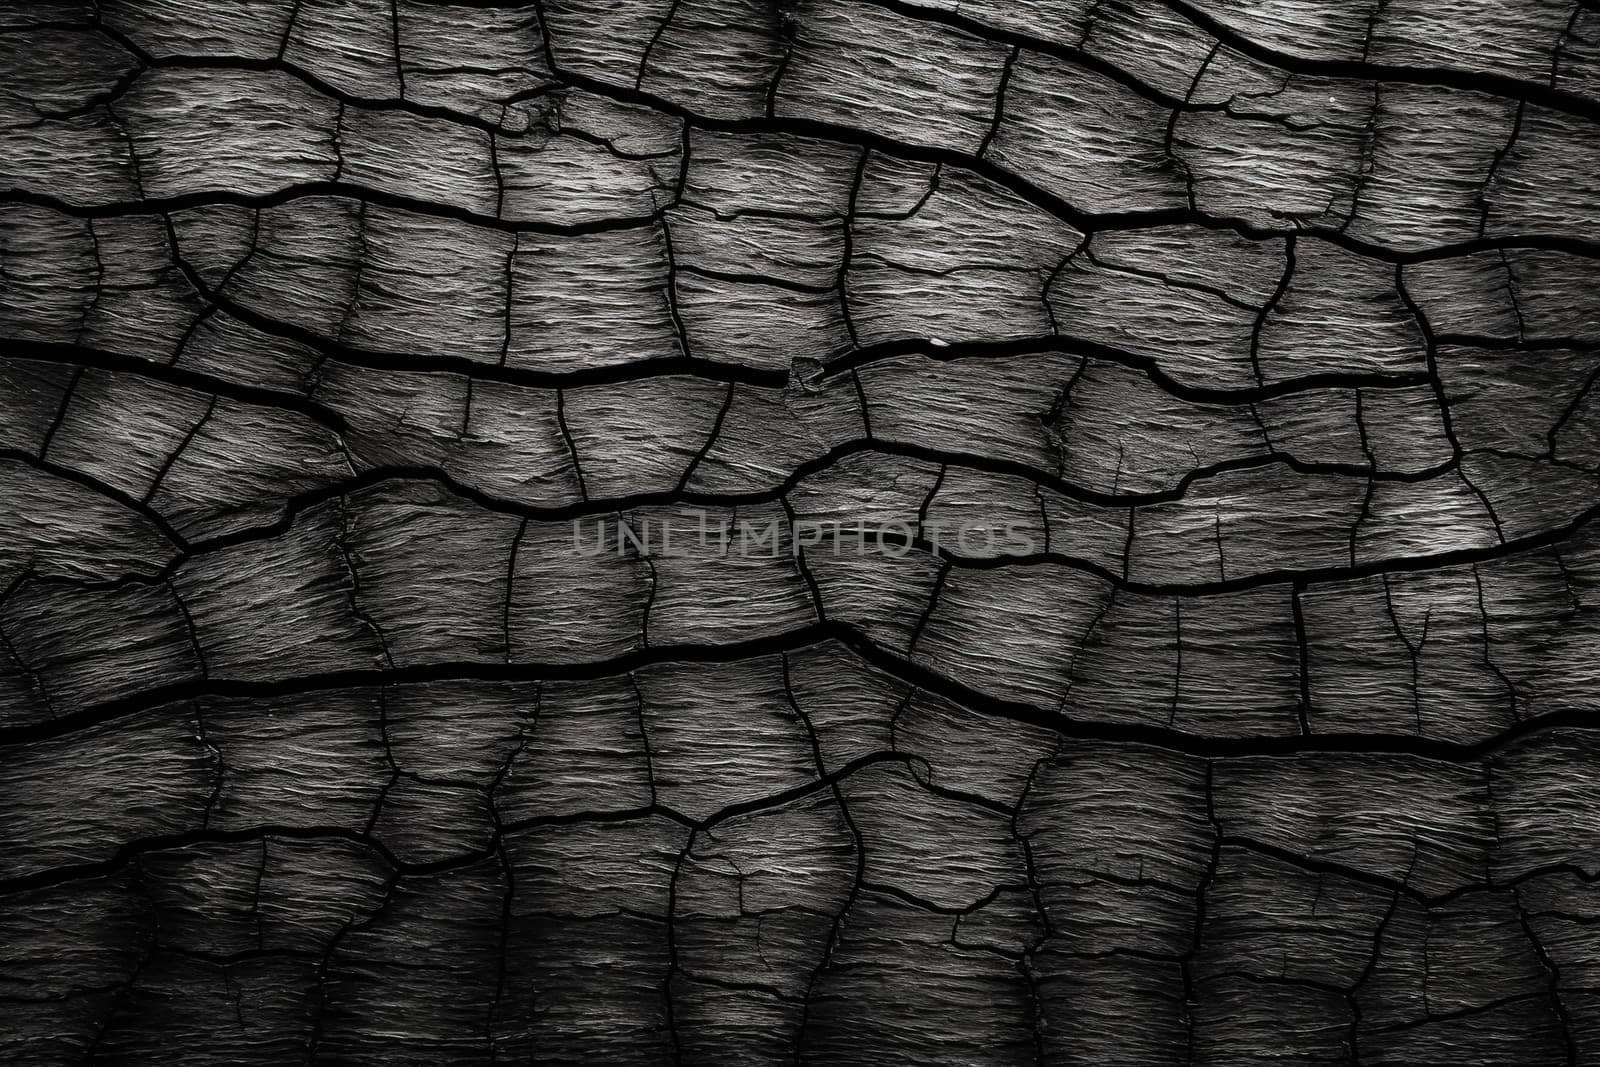 The image is a close up of a piece of wood with a black and grey color scheme. The wood appears to be charred and has a rough texture. Scene is somber and melancholic